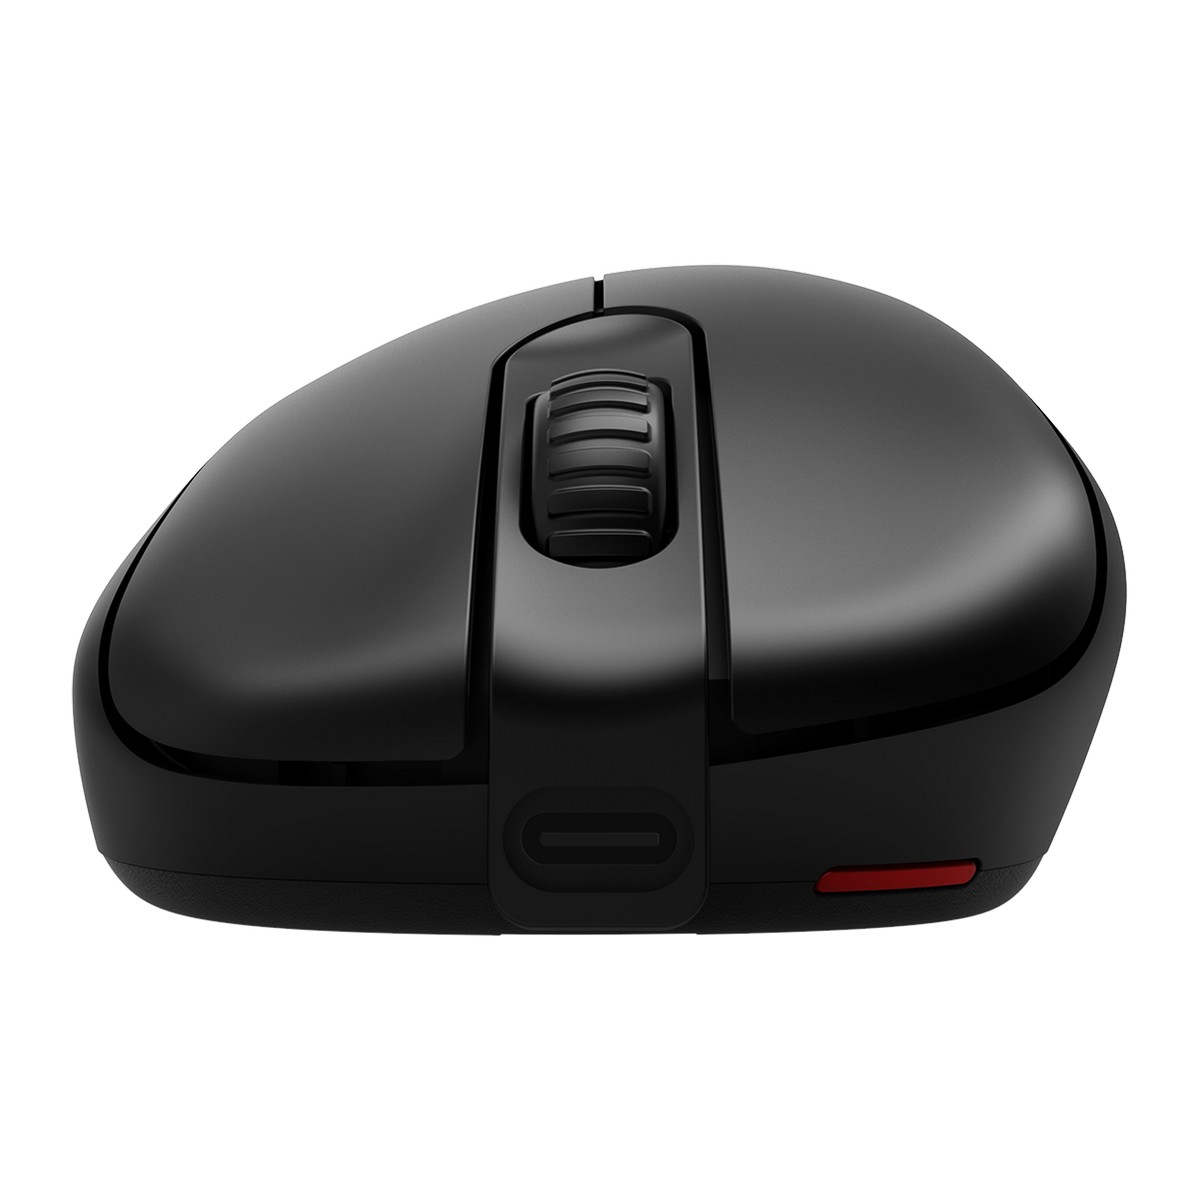 Zowie - BenQ ZOWIE EC1-CW Wireless Gaming Mouse For Esports (Large, Right Handed Assymetrical)